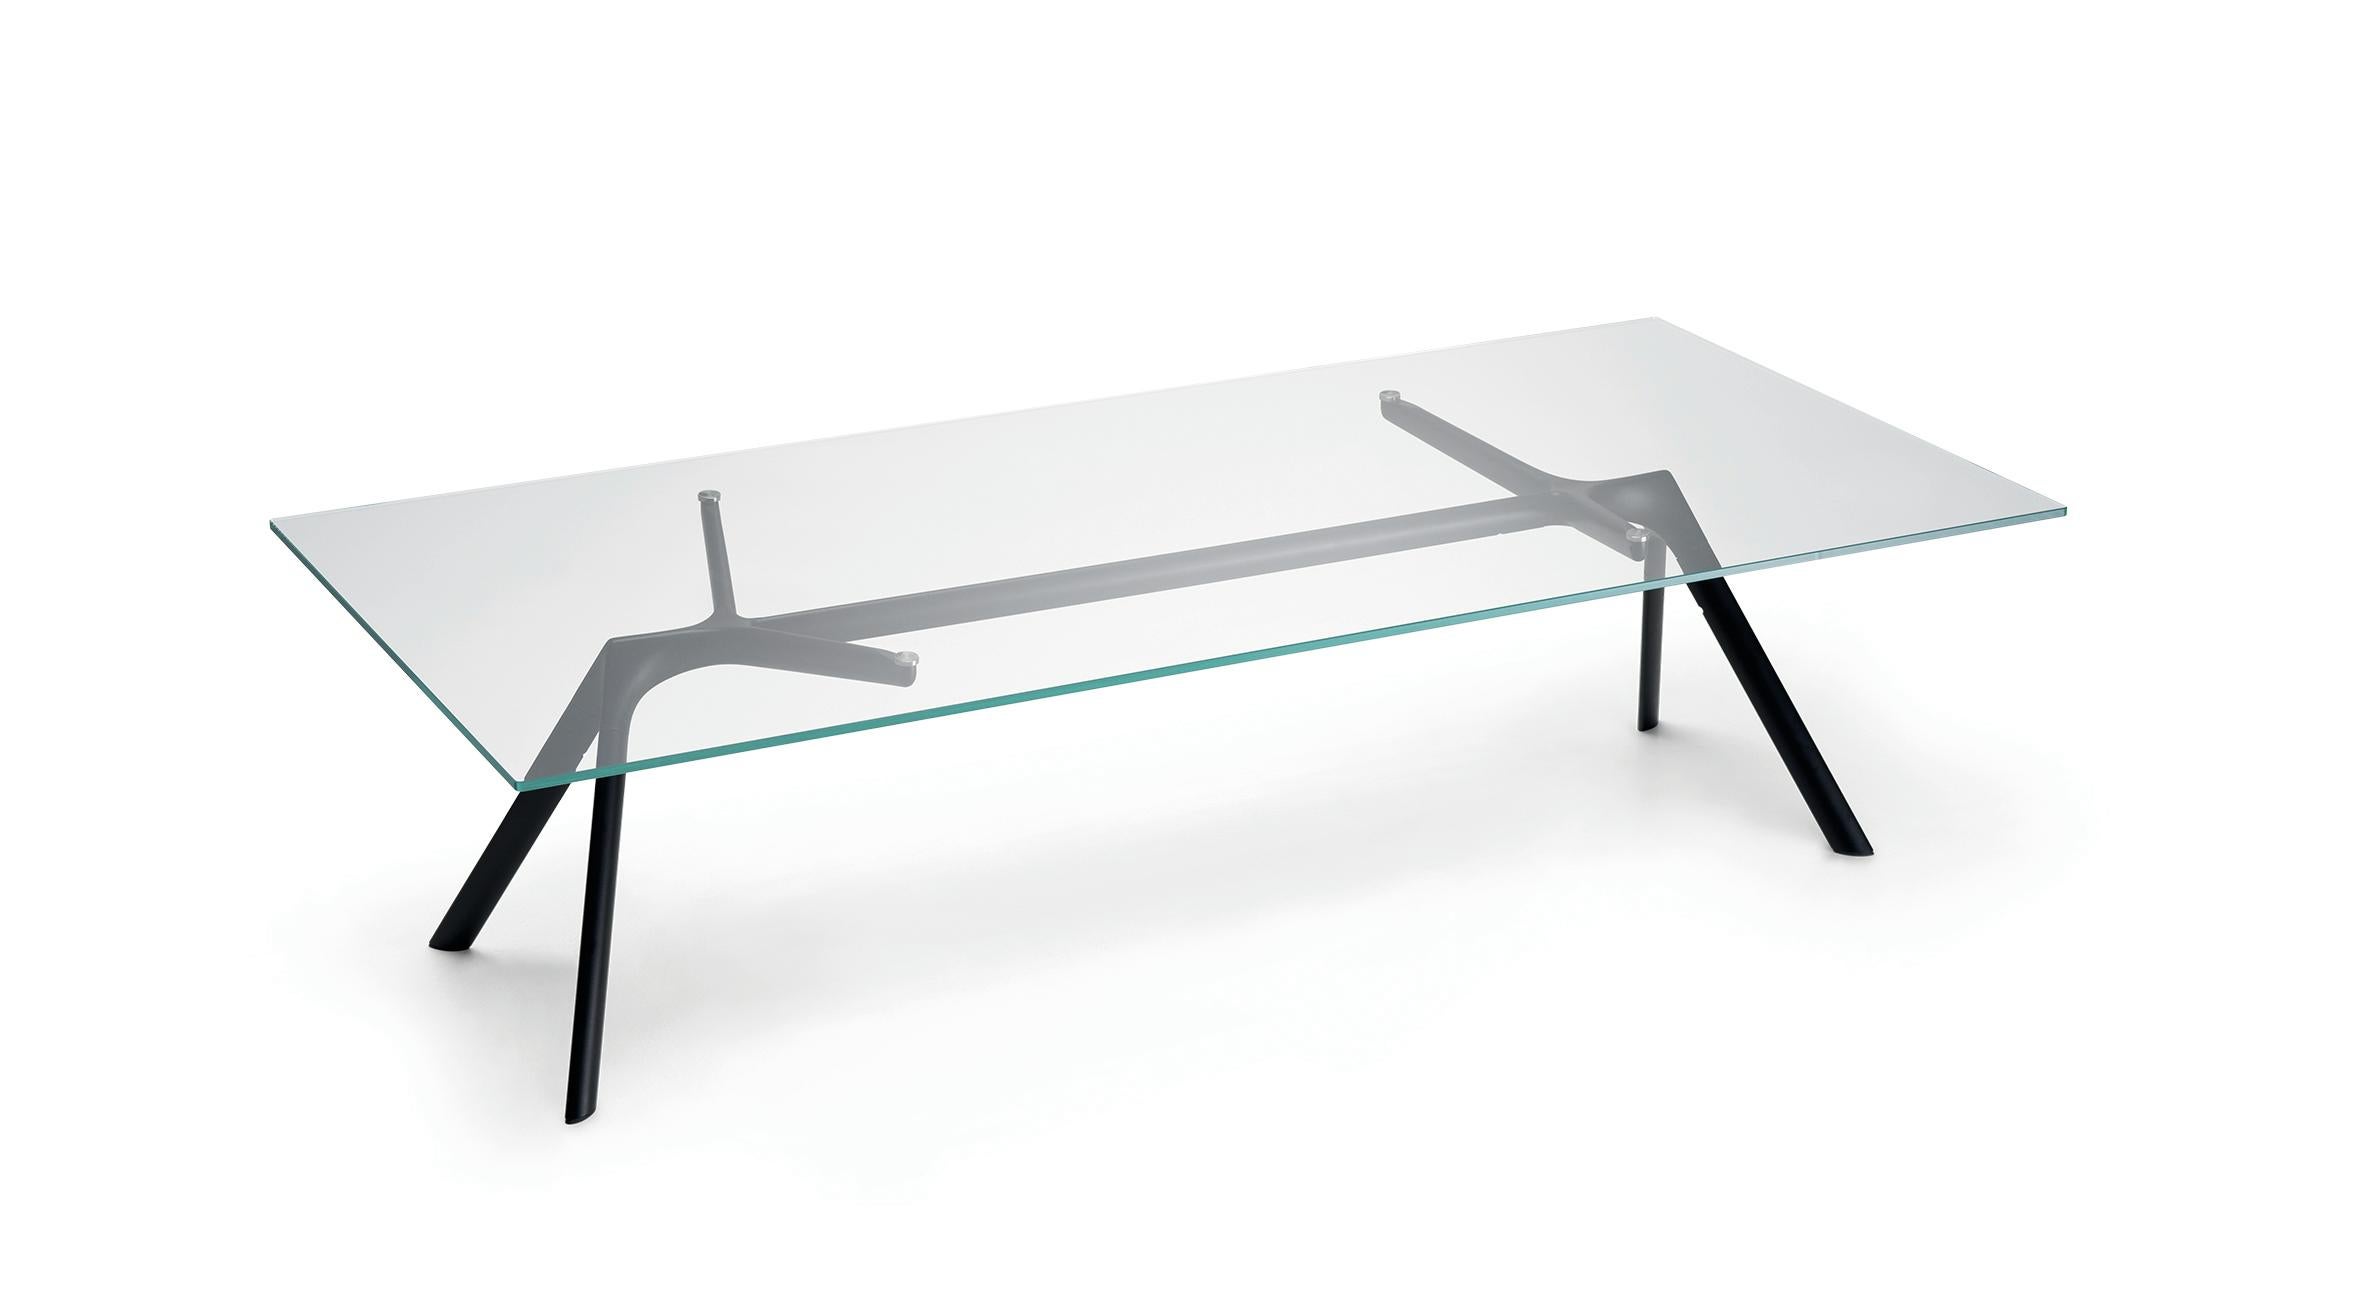 Alias Large Dry XS 45B Table in Glass Top with Black Lacquered Aluminium Frame by Alberto Meda

Low table with structure made of lacquered aluminium elements. Top in extra light tempered glass, thickness 10 mm.

Born in Lenno Tremezzina (Como),